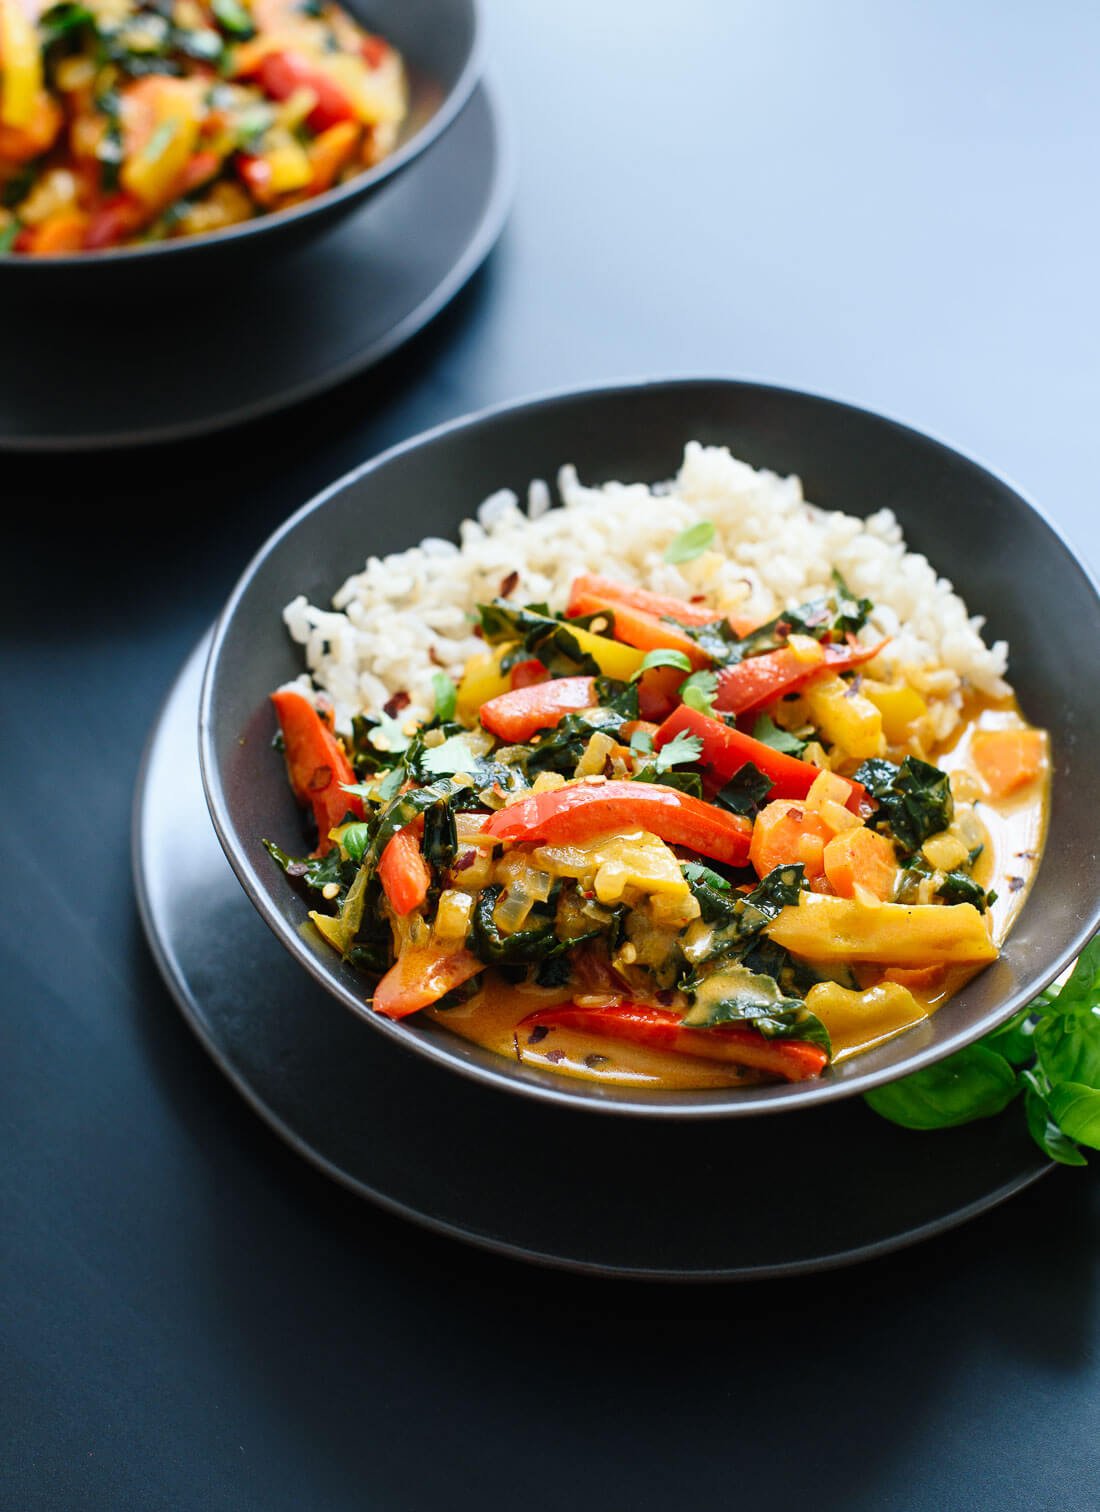 This red Thai curry recipe is just as good as your favorite Thai restaurant's! cookieandkate.com